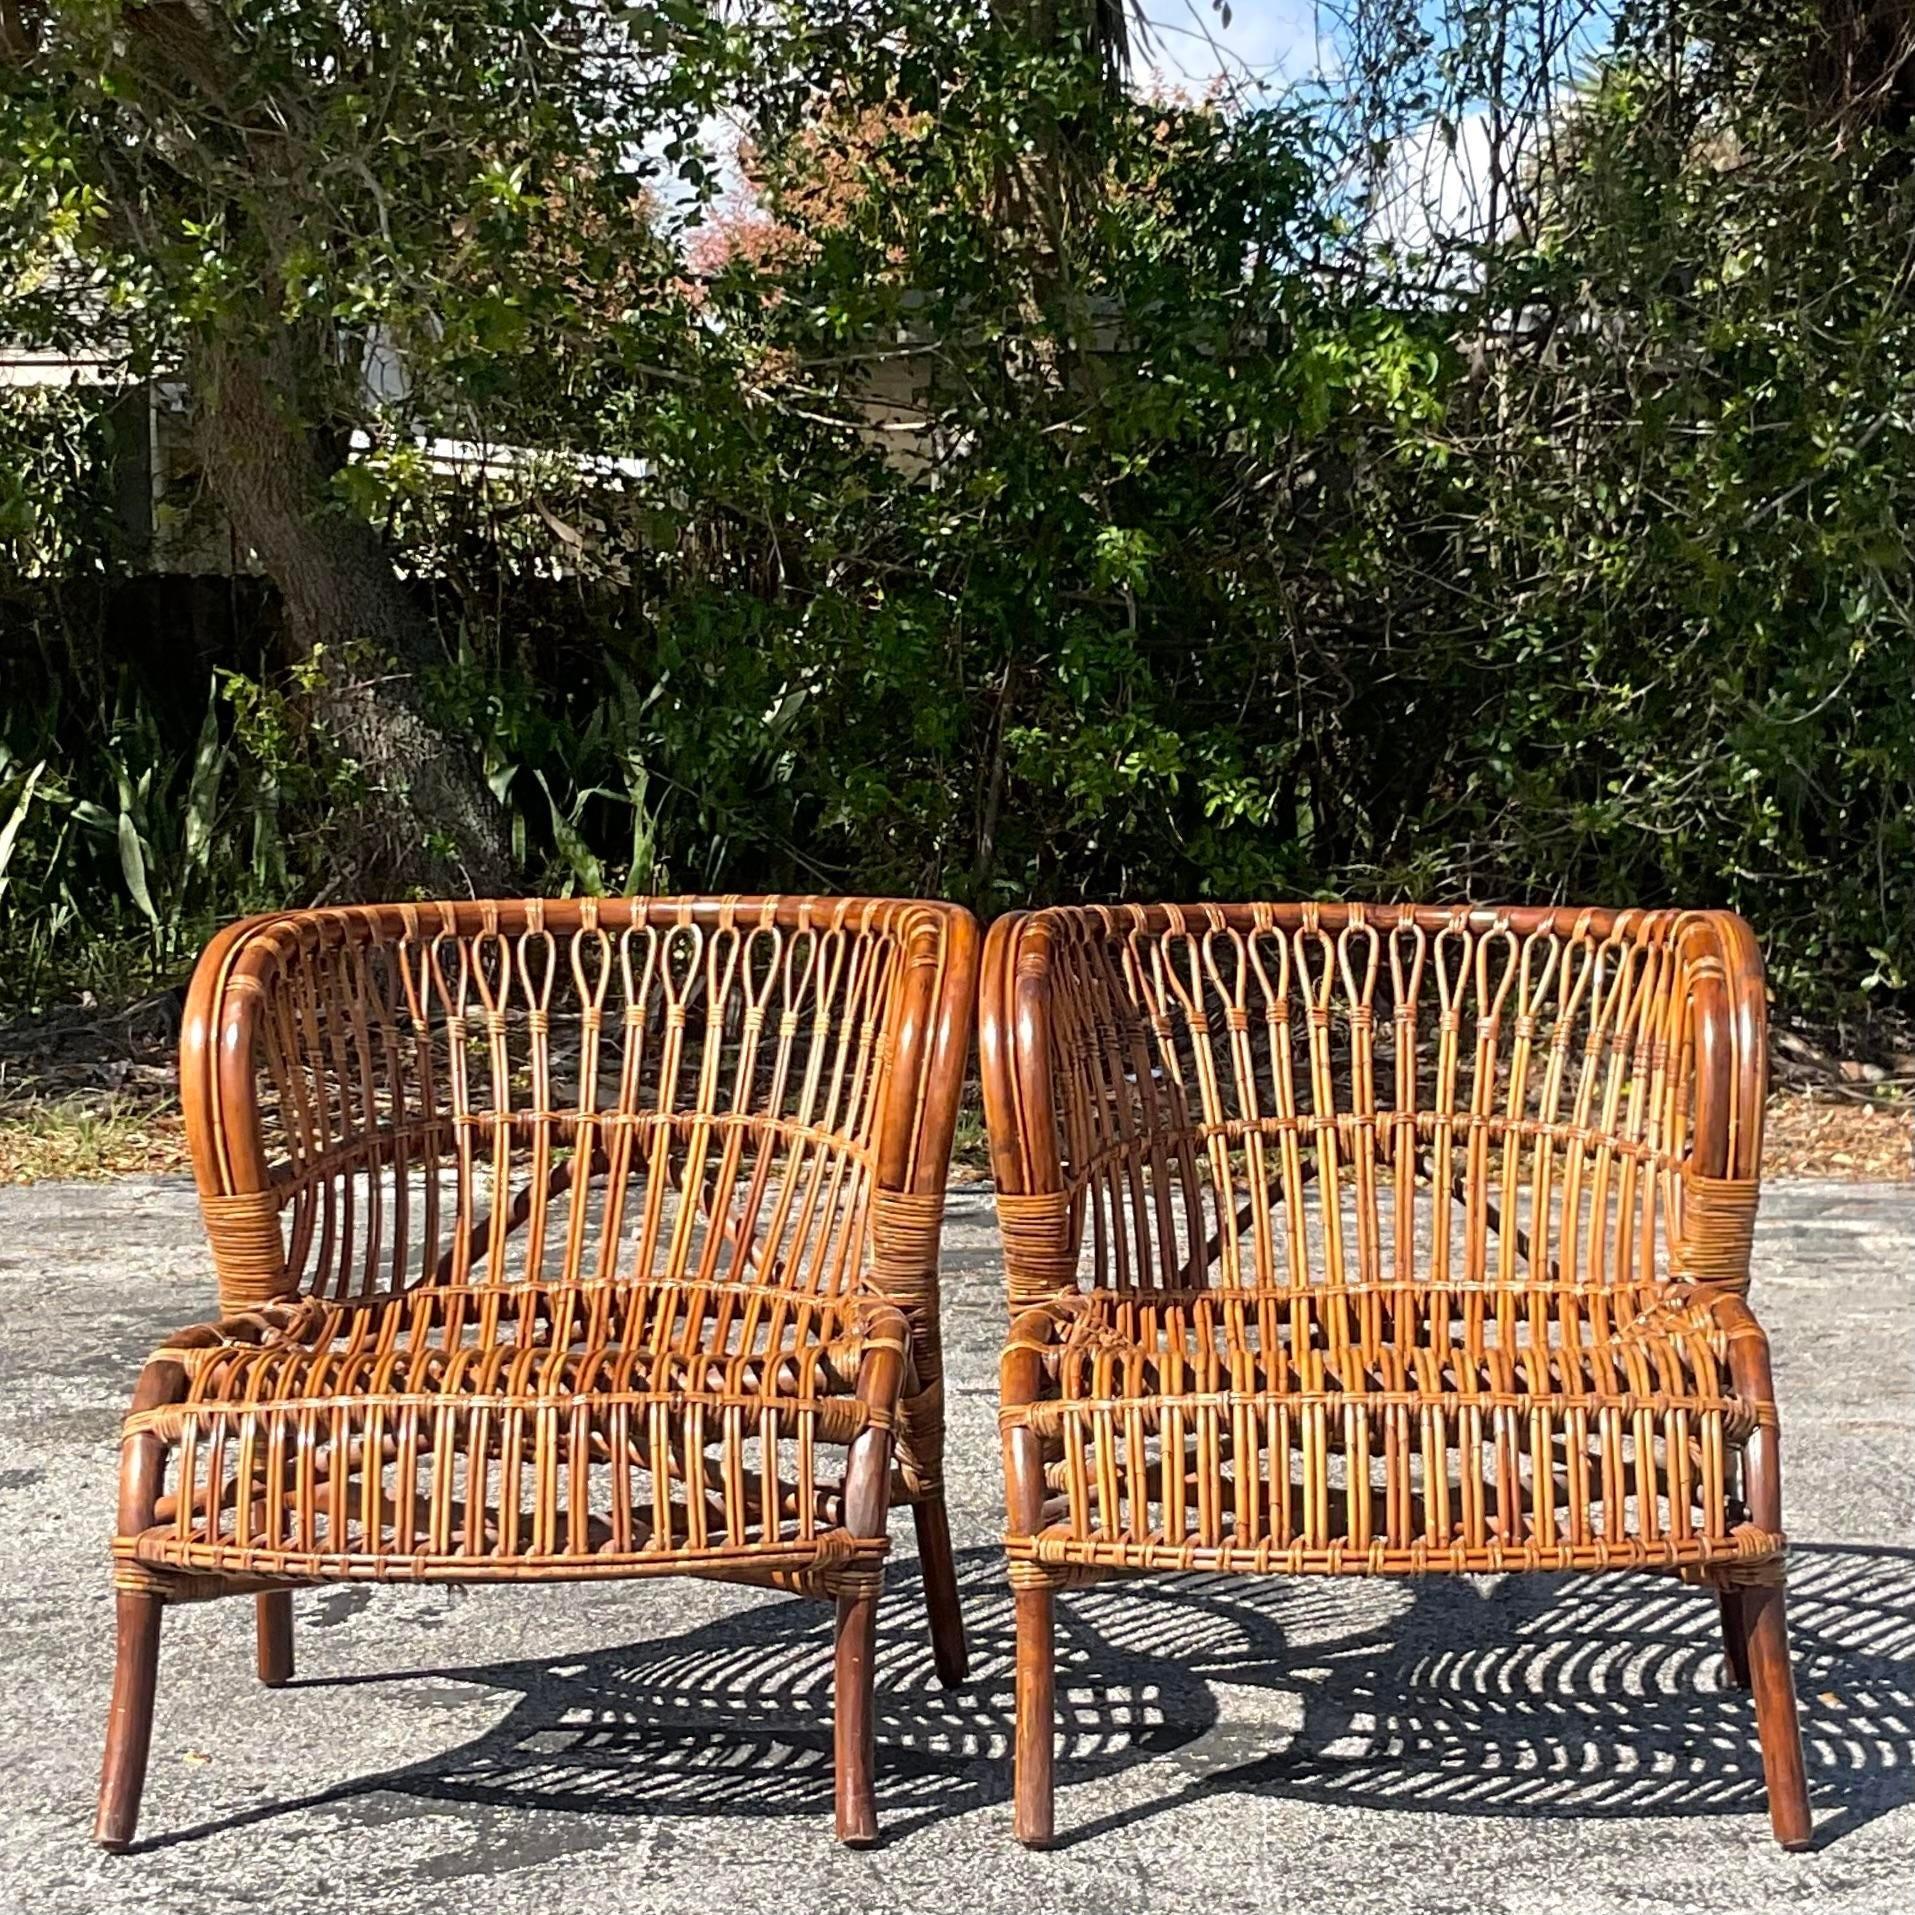 A fabulous pair of vintage Coastal lounge chairs. Gorgeous bent rattan in a chic wave design. Acquired from a Palm Beach estate.